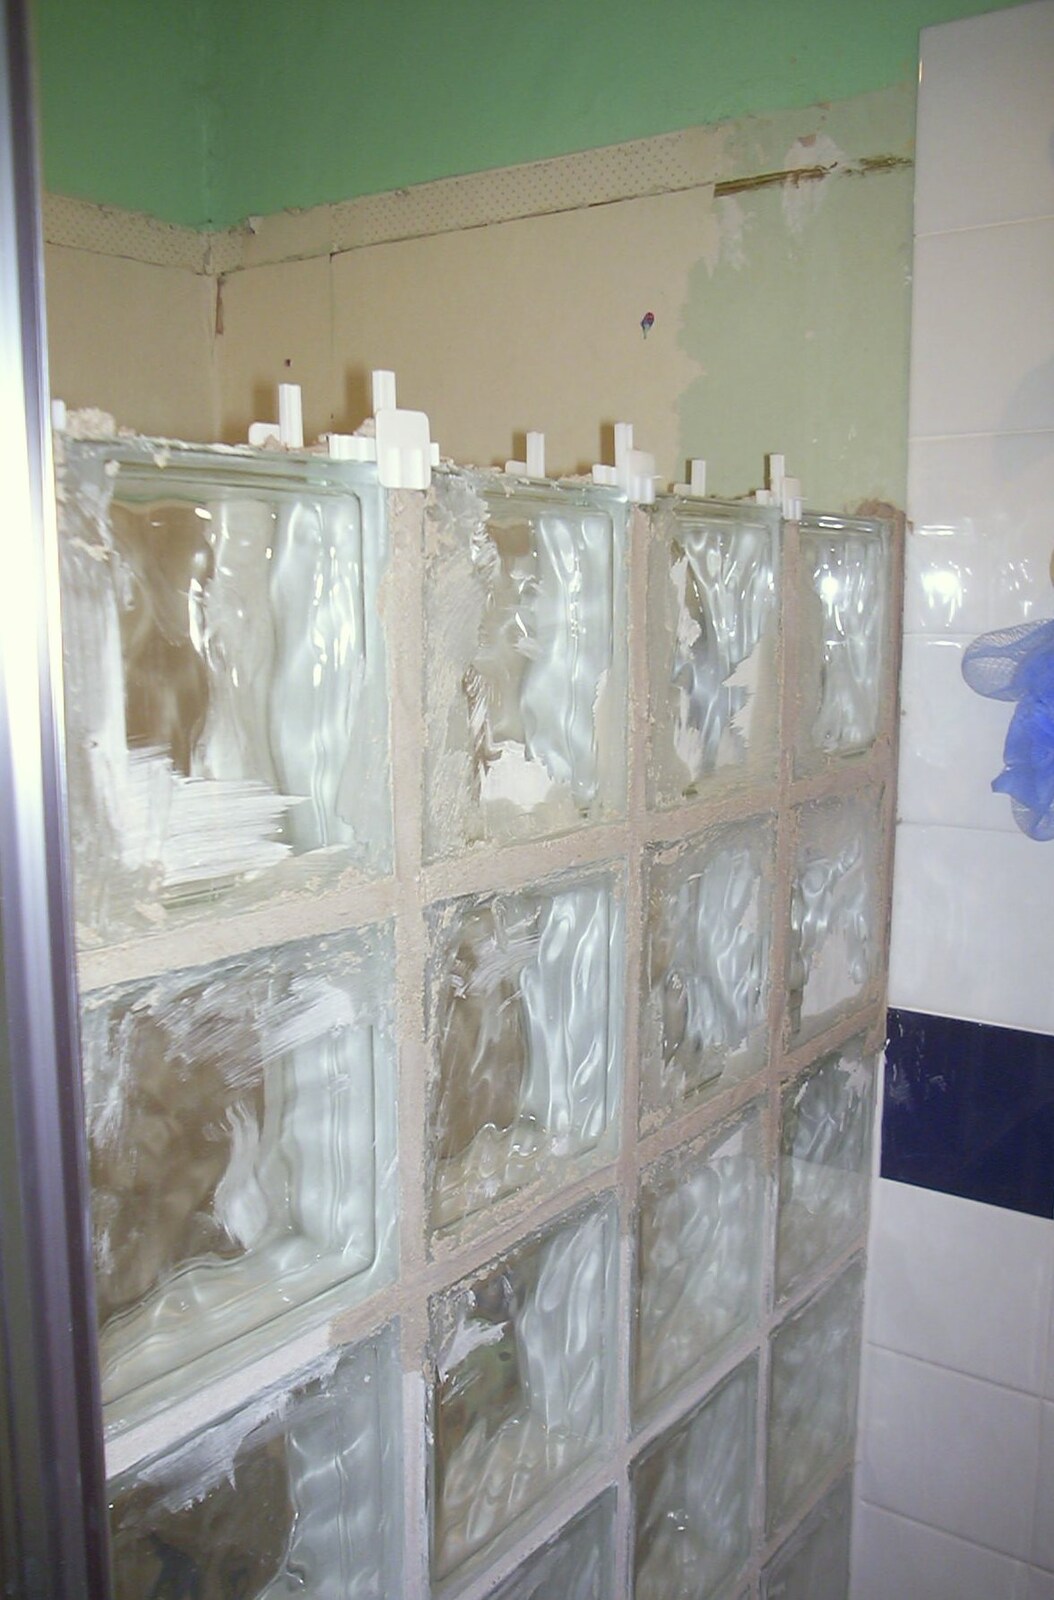 A glass-block wall is built for the shower from Bathroom Rebuilding, Brome, Suffolk - 1st February 2002